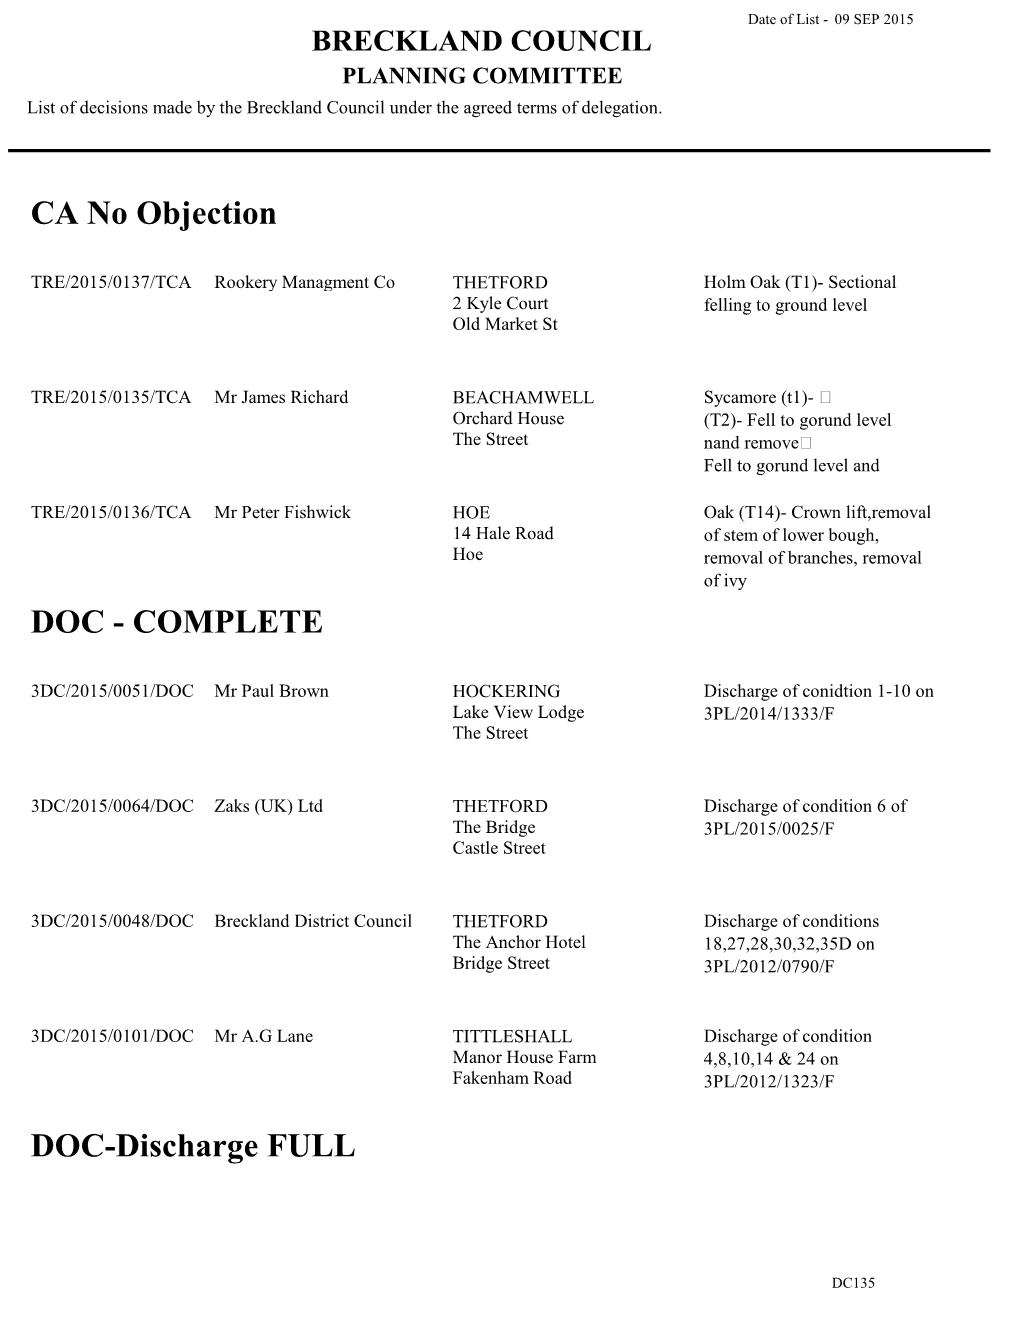 COMPLETE DOC-Discharge FULL